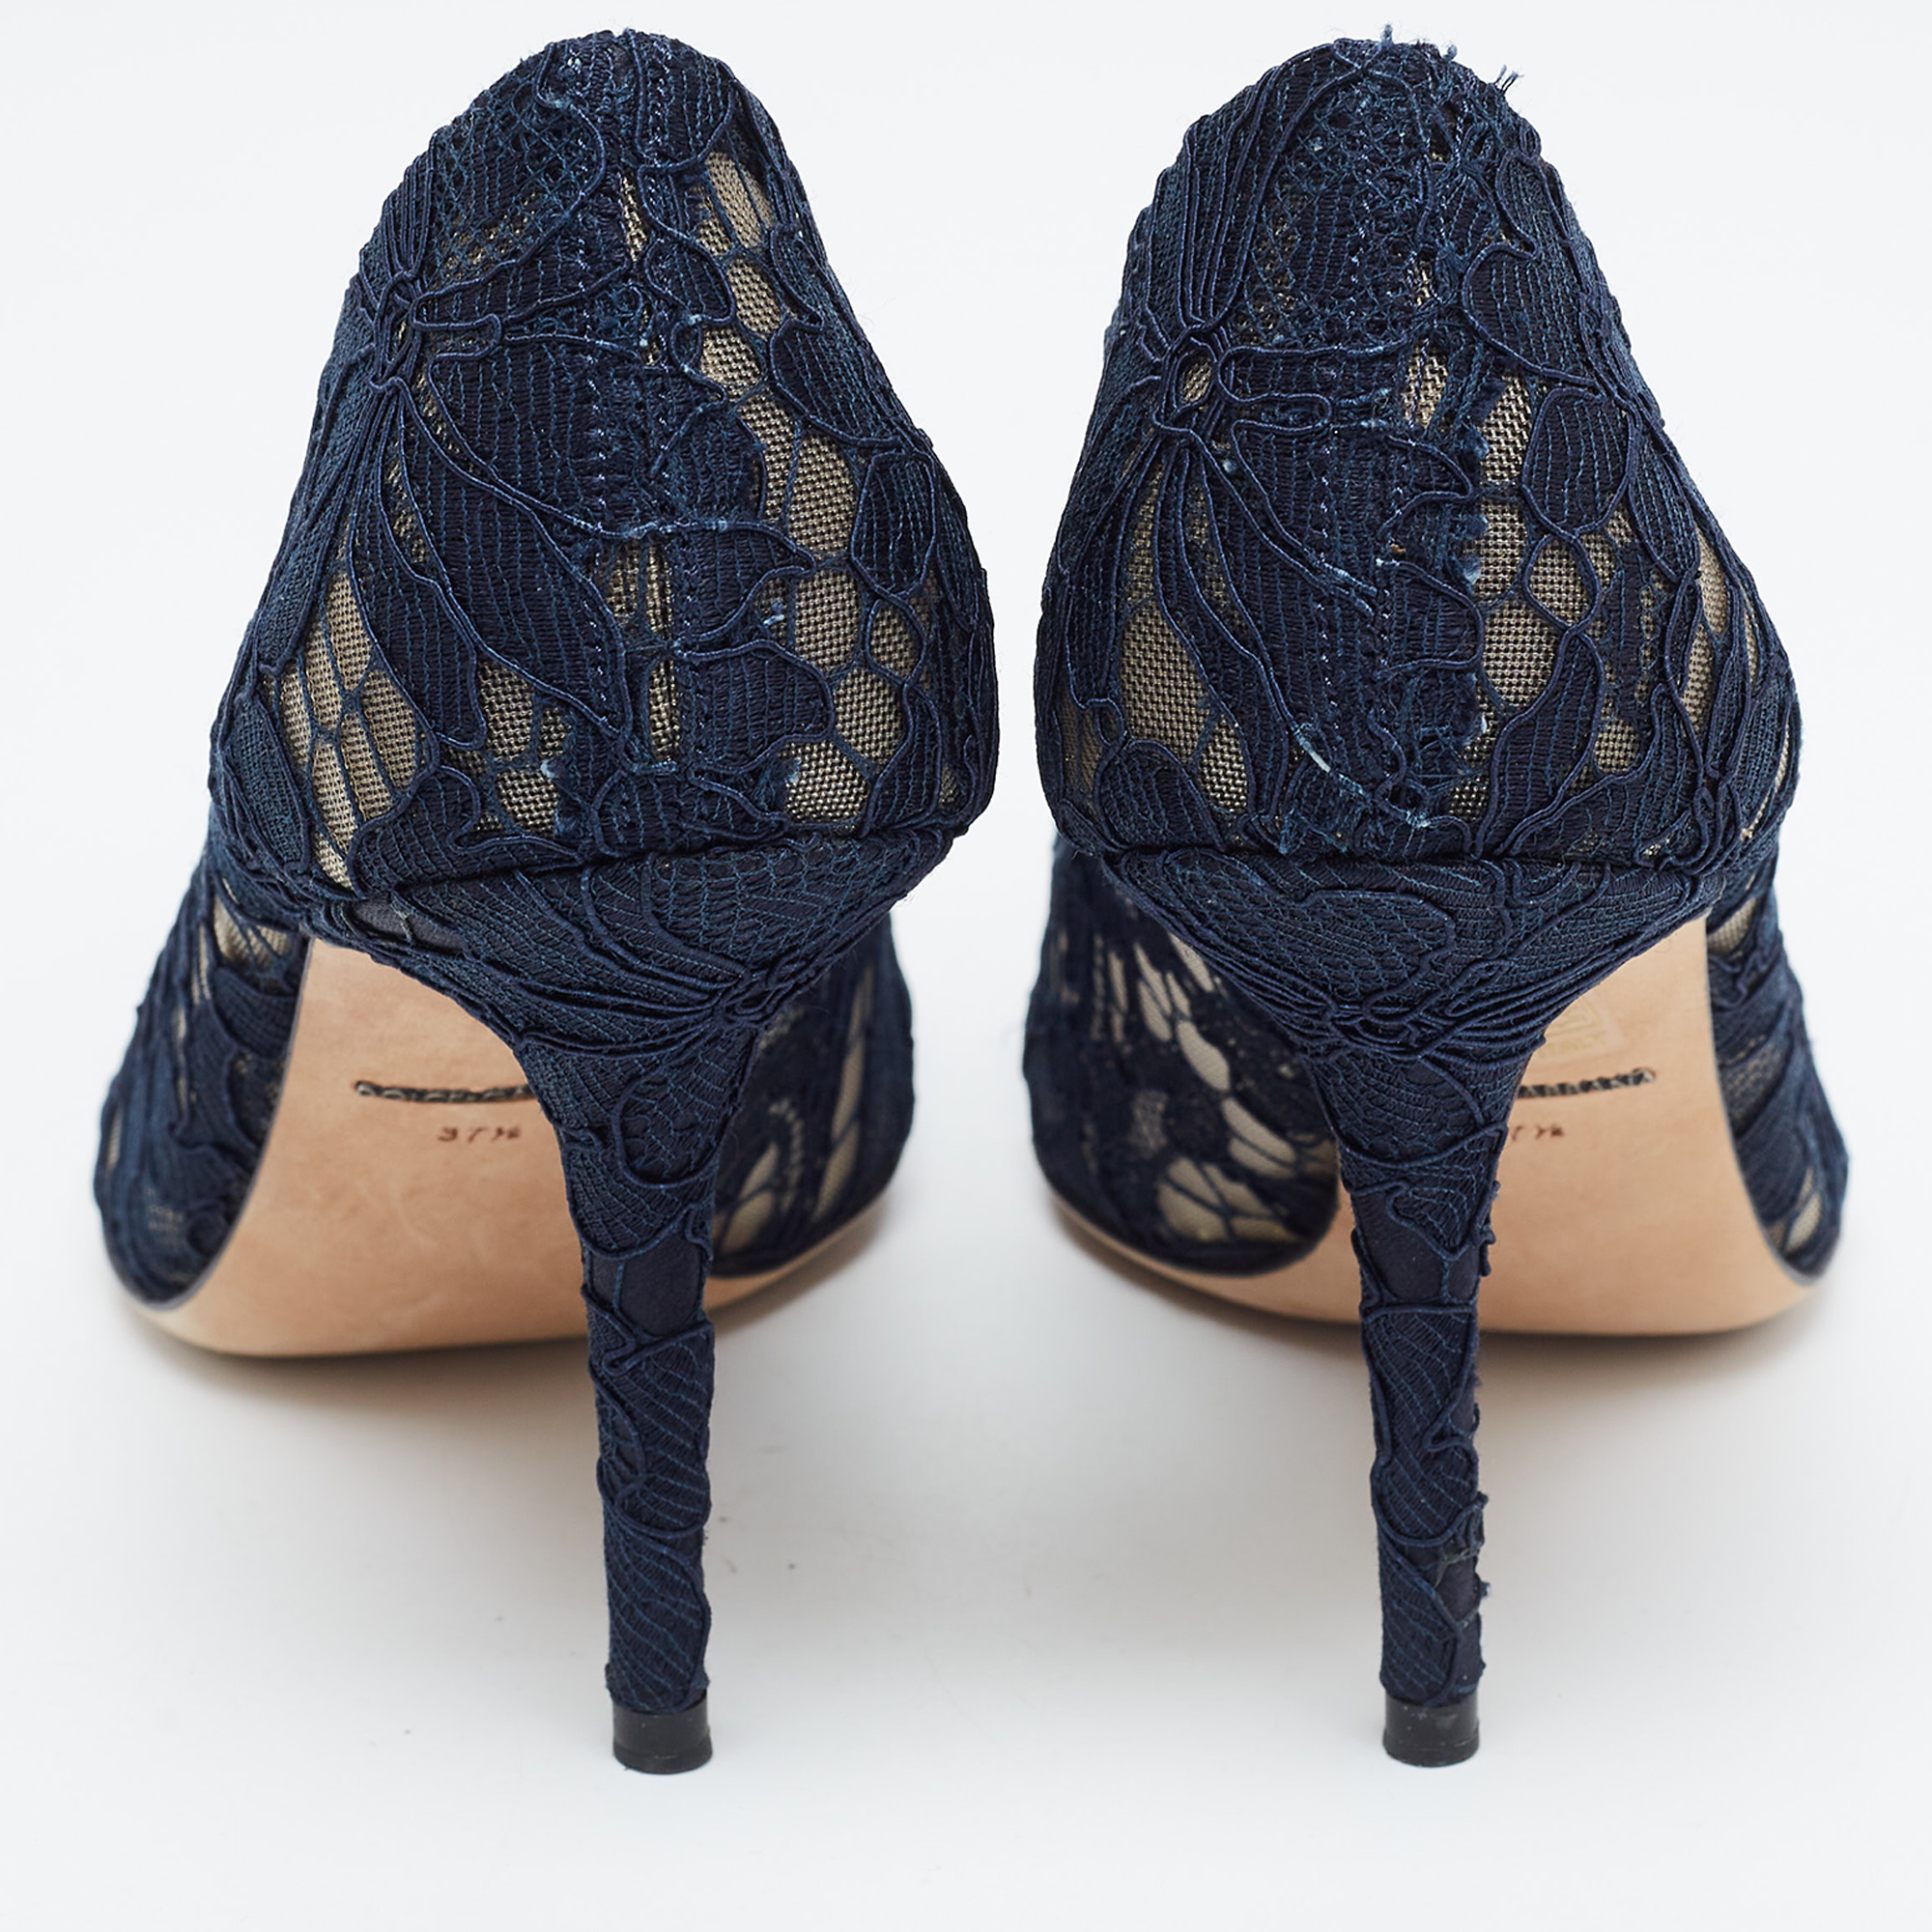 Dolce & Gabbana Navy Blue Lace And Mesh Bellucci Pumps Size 37.5